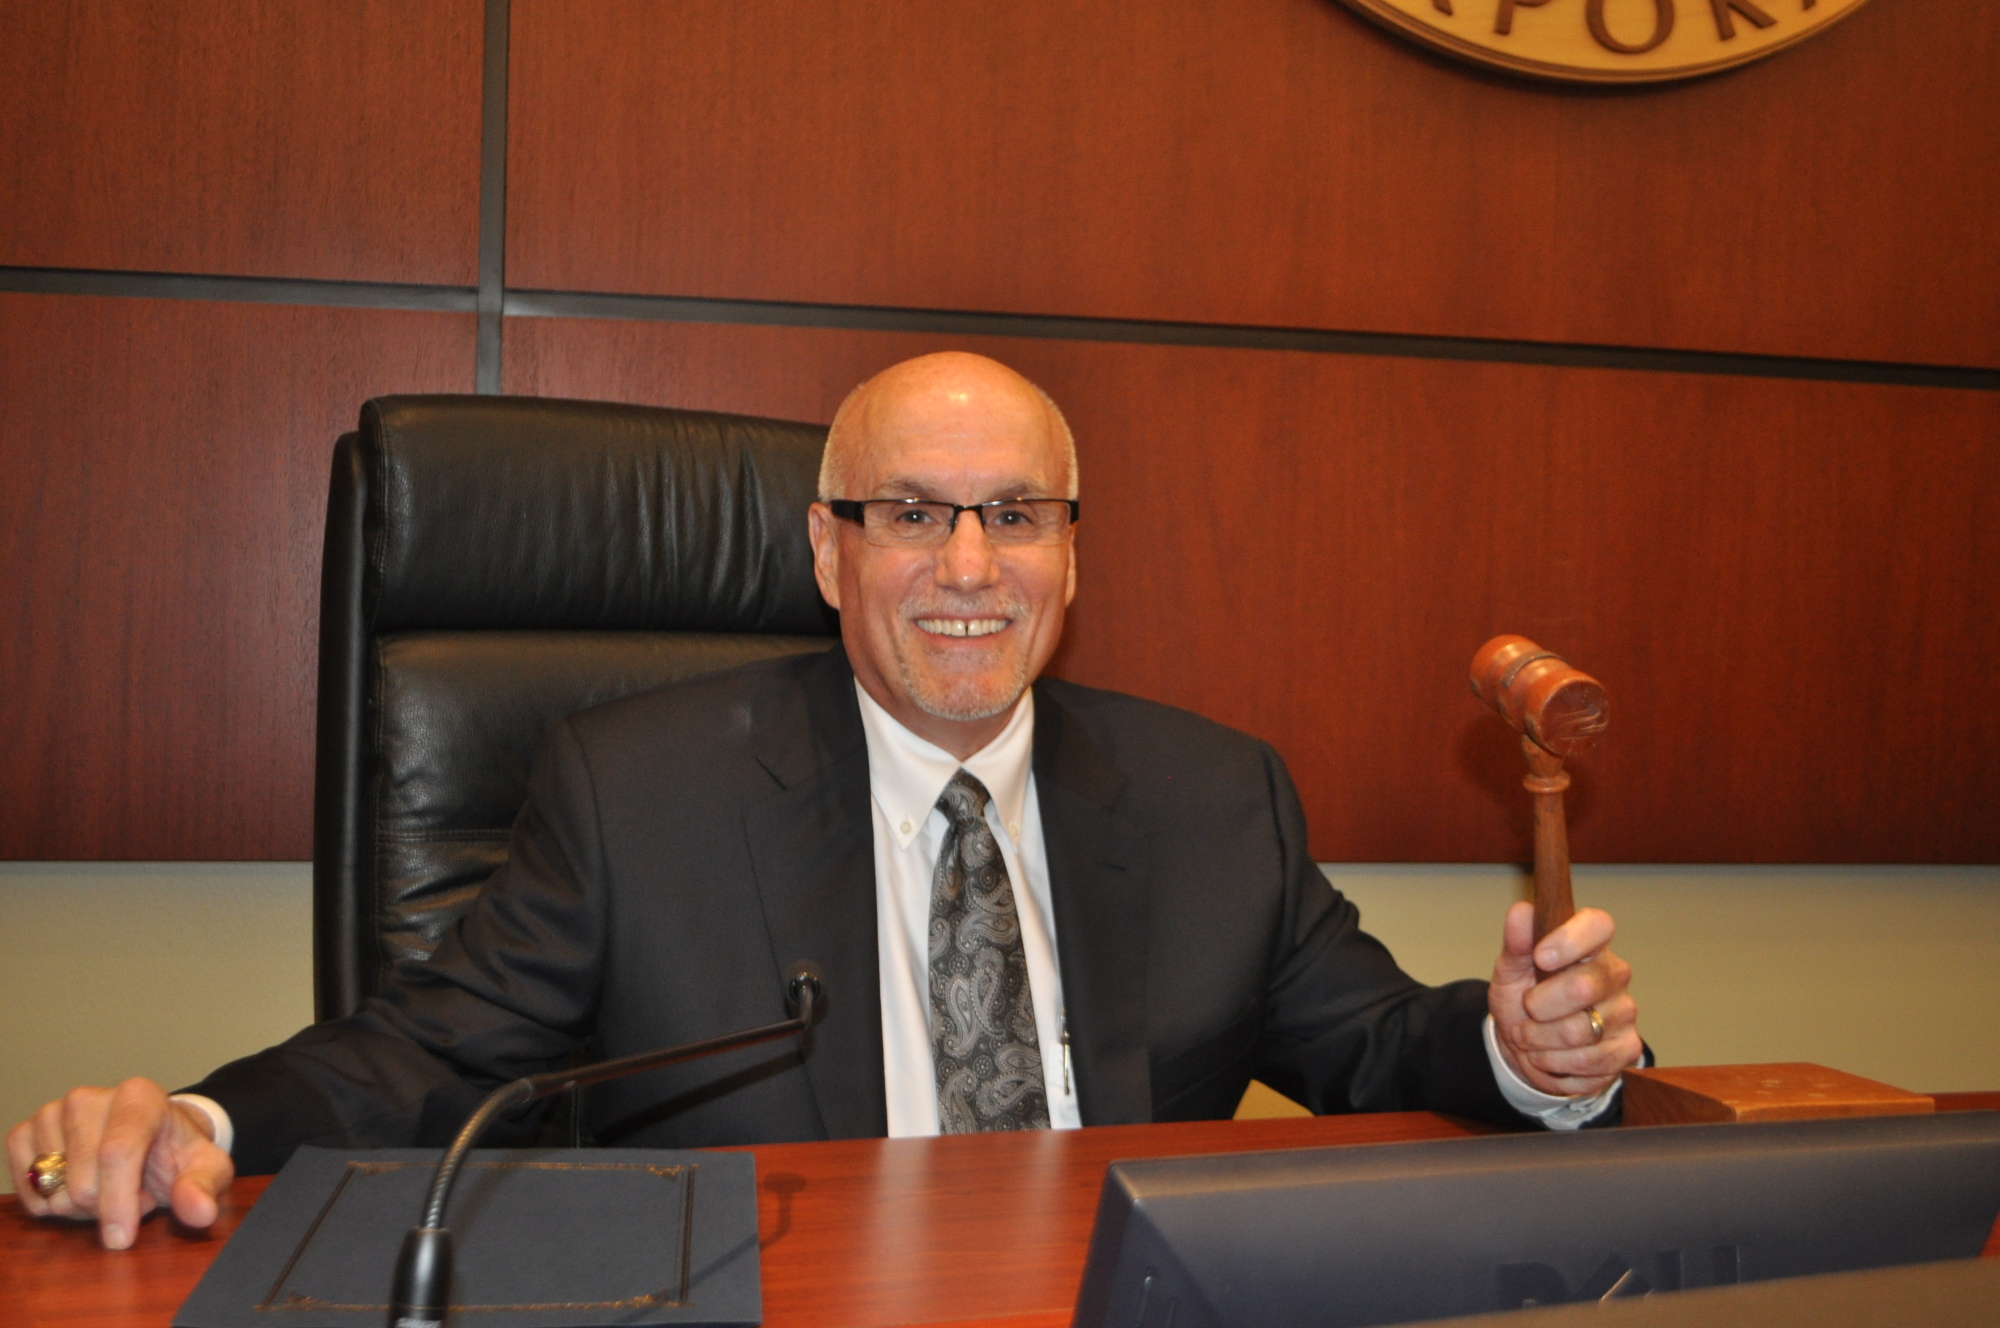 Jack Duncan assumes the role of mayor after four years on the Longboat Key Town Commission and one year as vice mayor.